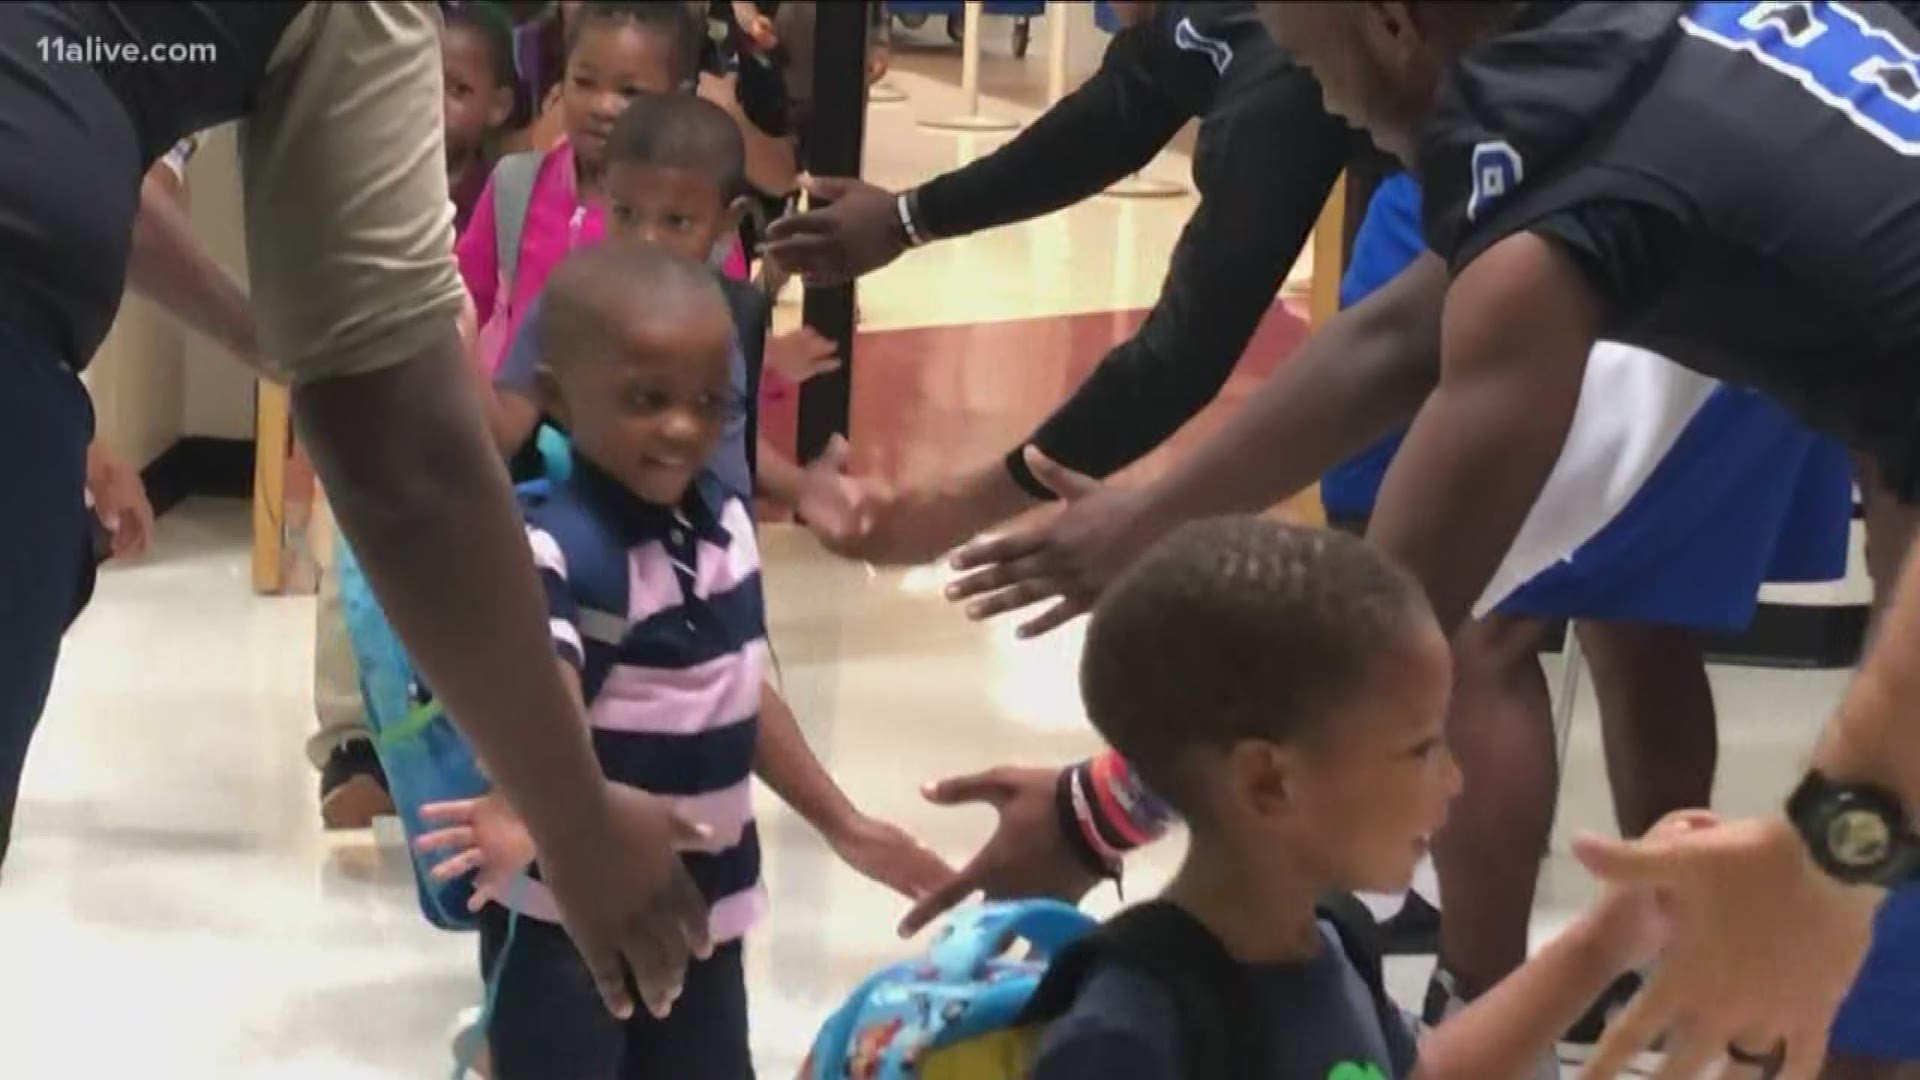 The seniors who once attended the elementary school passed out supplies and gave high-fives!